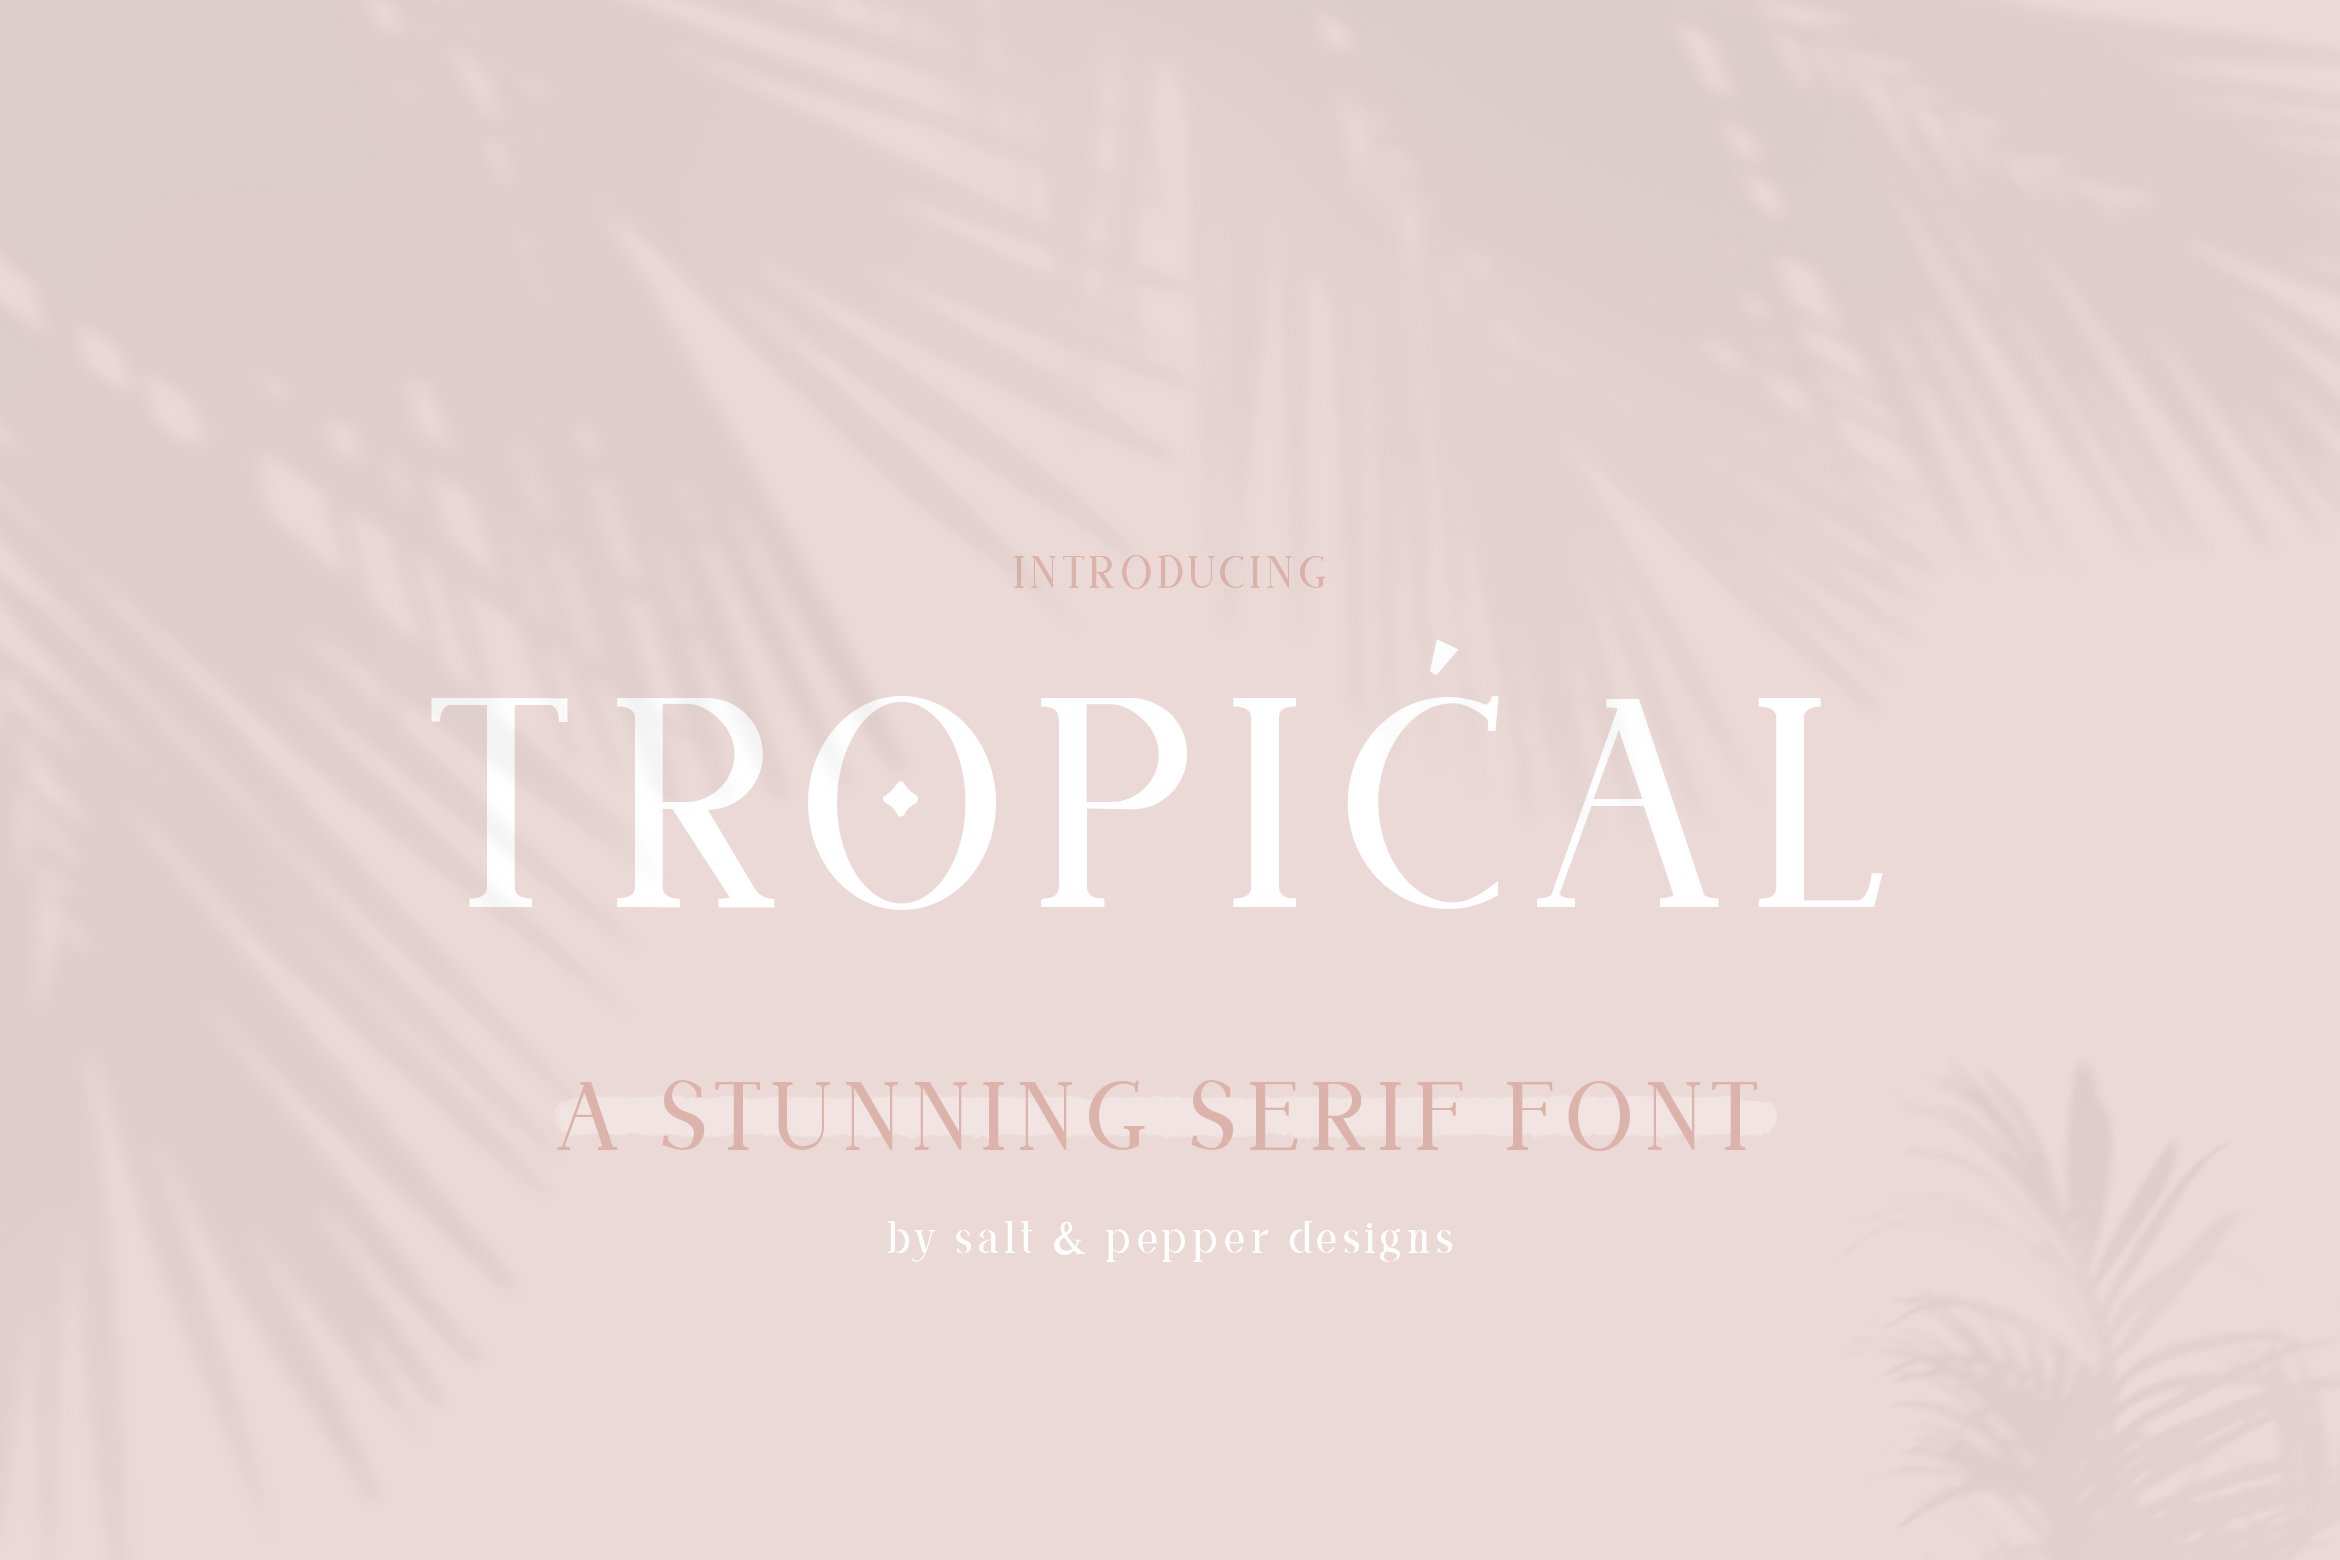 Tropical Serif Font cover image.